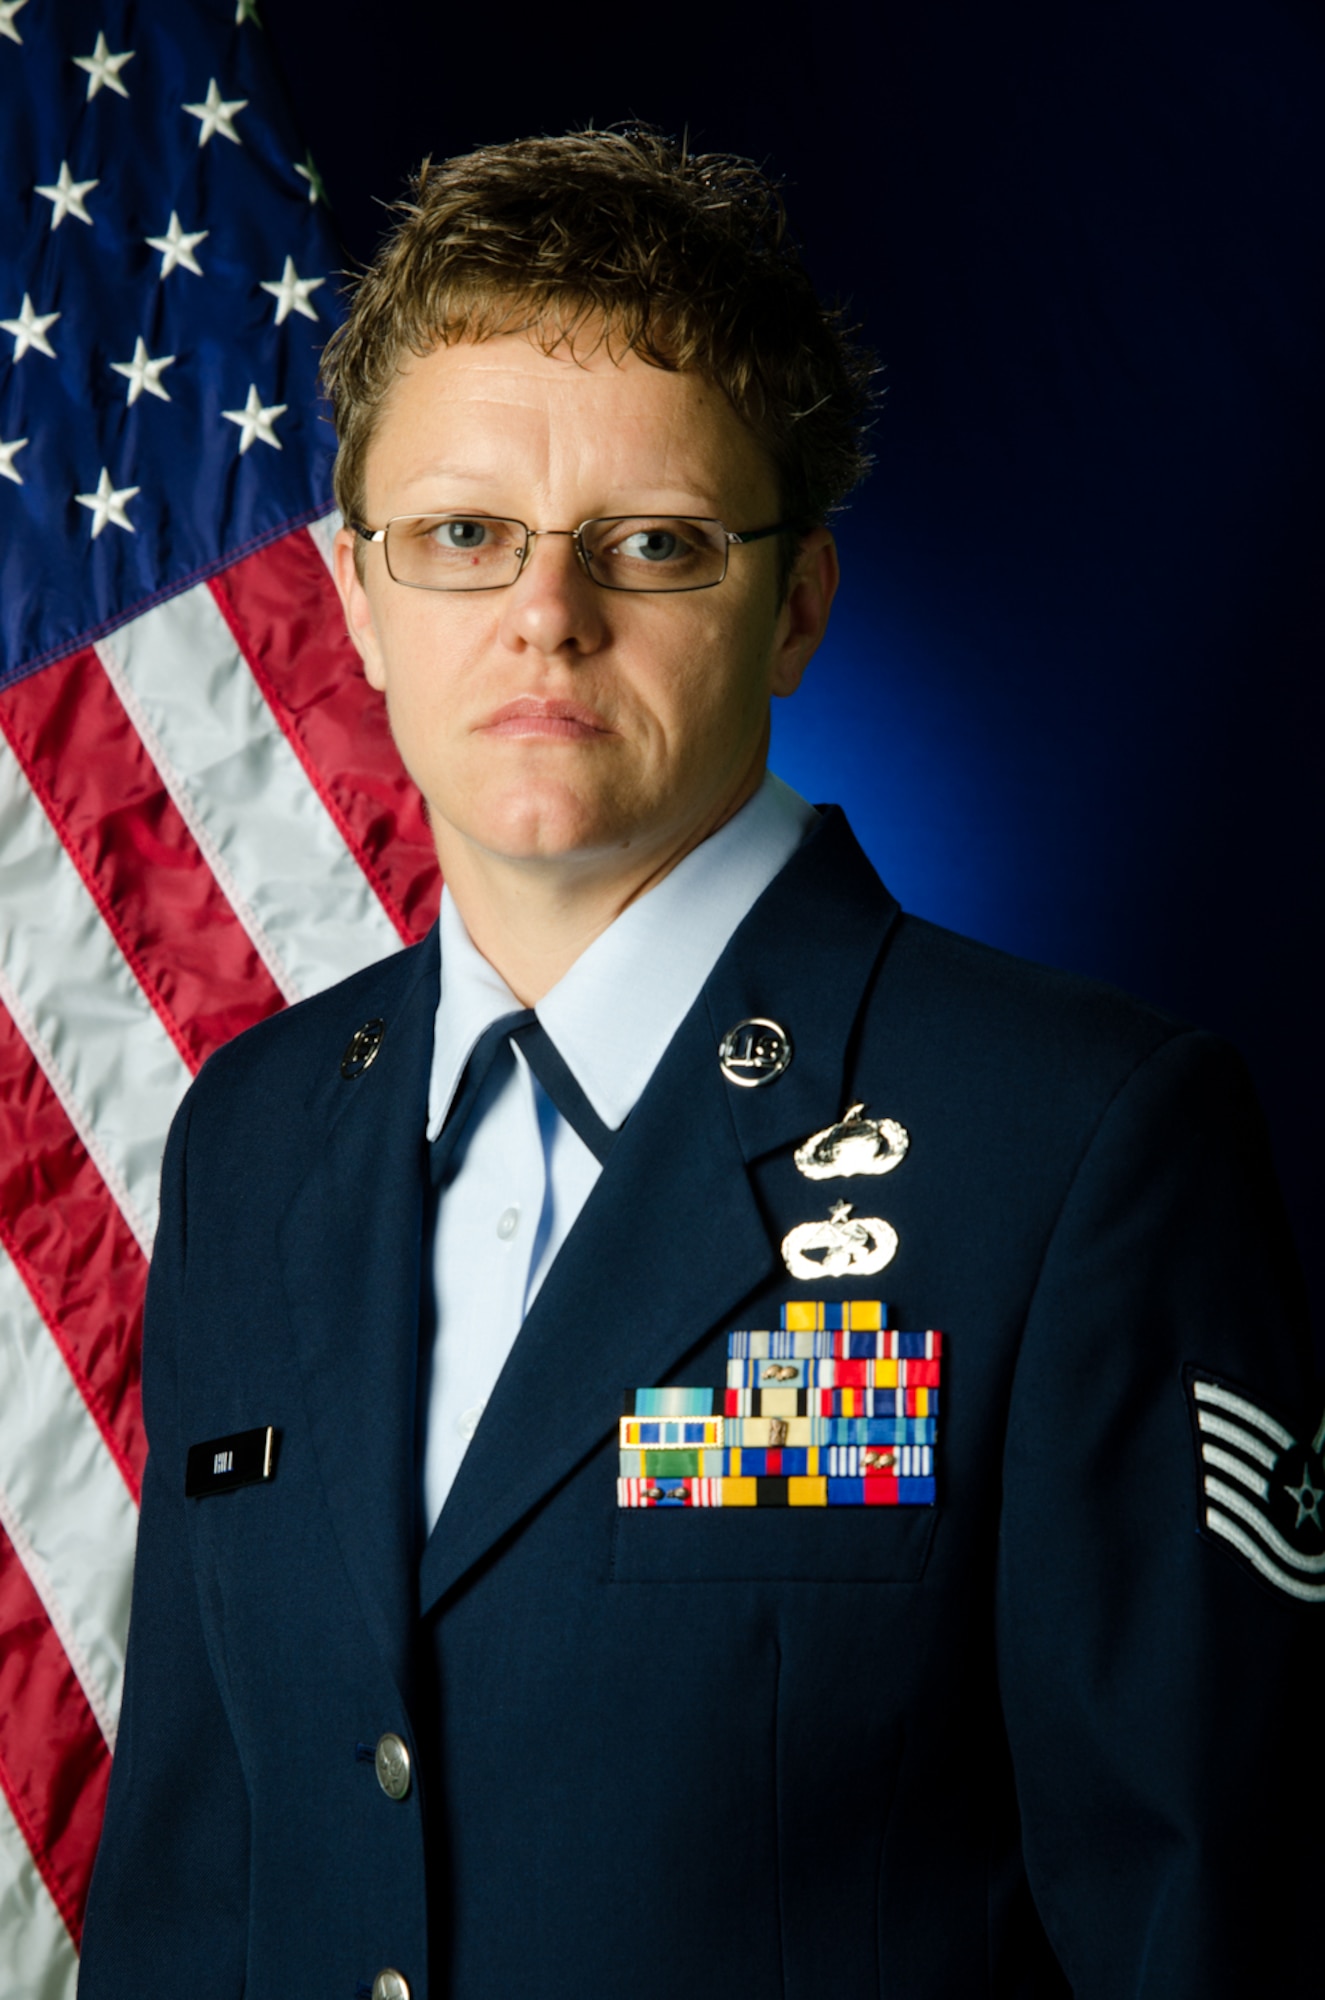 Tech. Sgt. Jennifer Hill, a crew chief with the 139th Maintenance Group, poses for a portrait at Rosecrans Air National Guard Base, St. Joseph, Mo., April 14, 2012. Hill was named the 139th Maintenance Airman of the Quarter. (U.S. Air Force photo by Senior Airman Kelsey Stuart/Missouri Air National Guard)